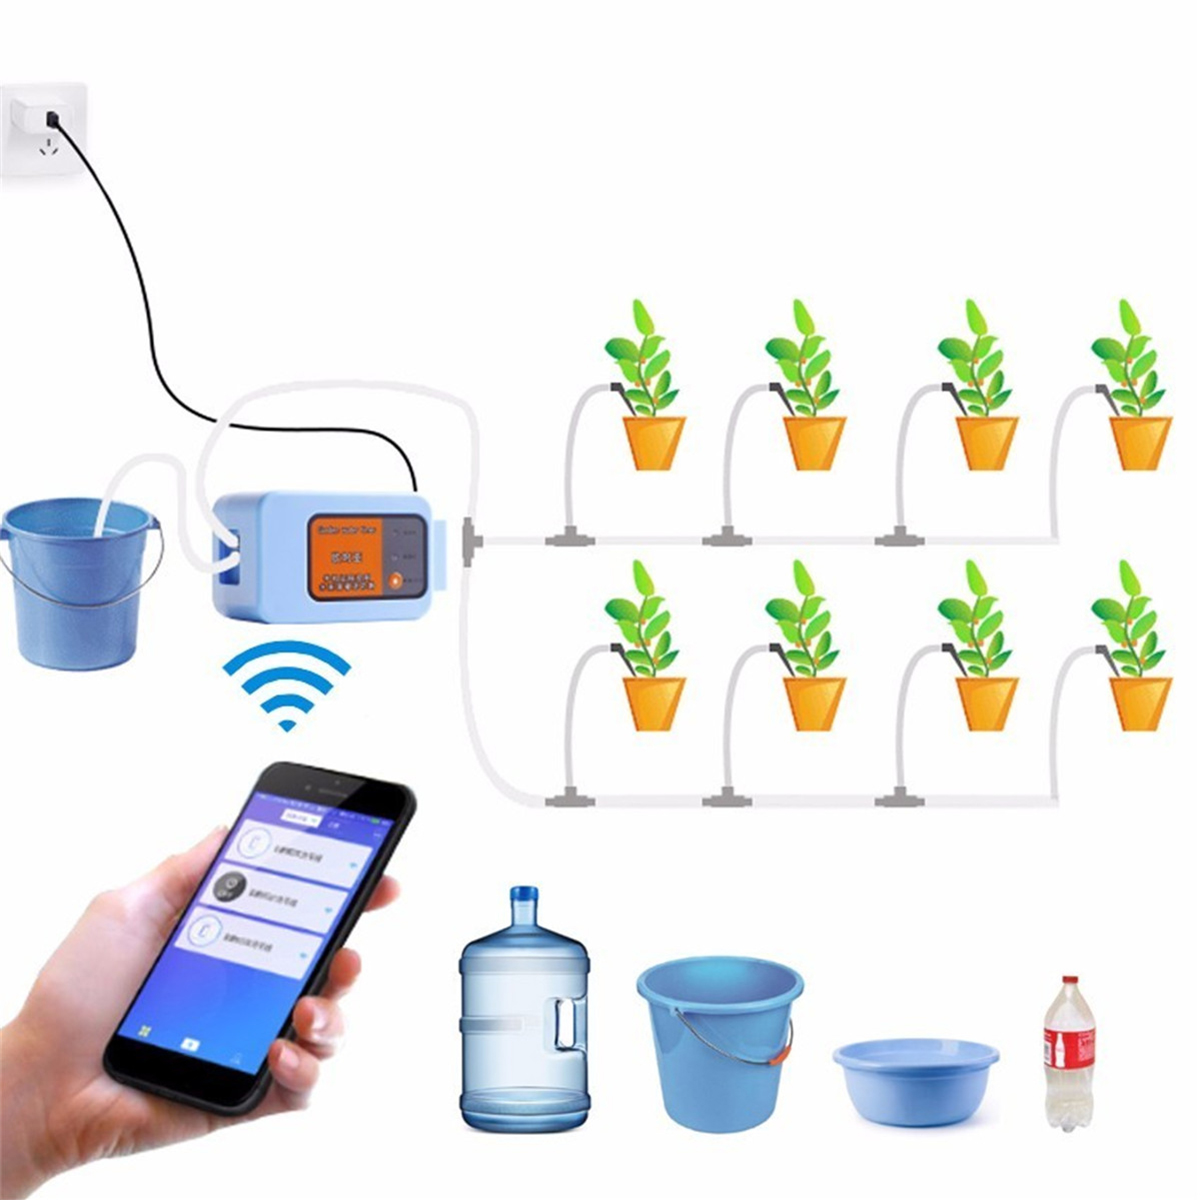 Automatic-Watering-Device-Phone-Control-Irrigation-System-Irrigation-Computer-Irrigation-Timer-with--1580072-10